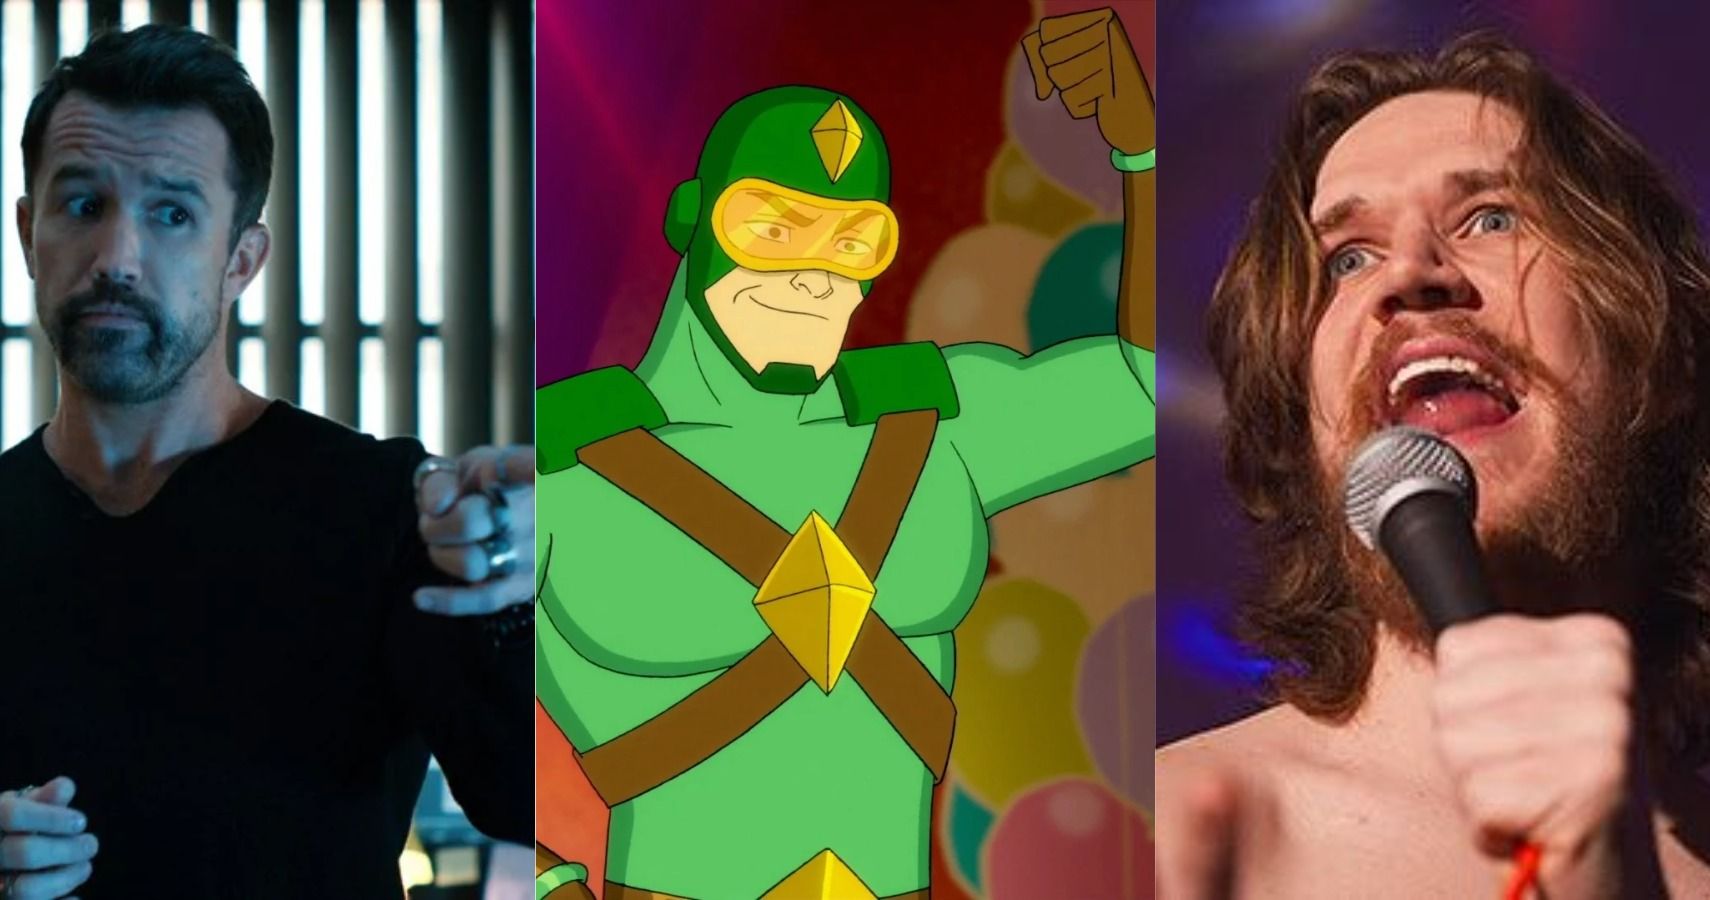 A combined image featuring Rob McElhenney and Bo Burnham as potential choices for Kite Man in season 2 of Peacemaker.